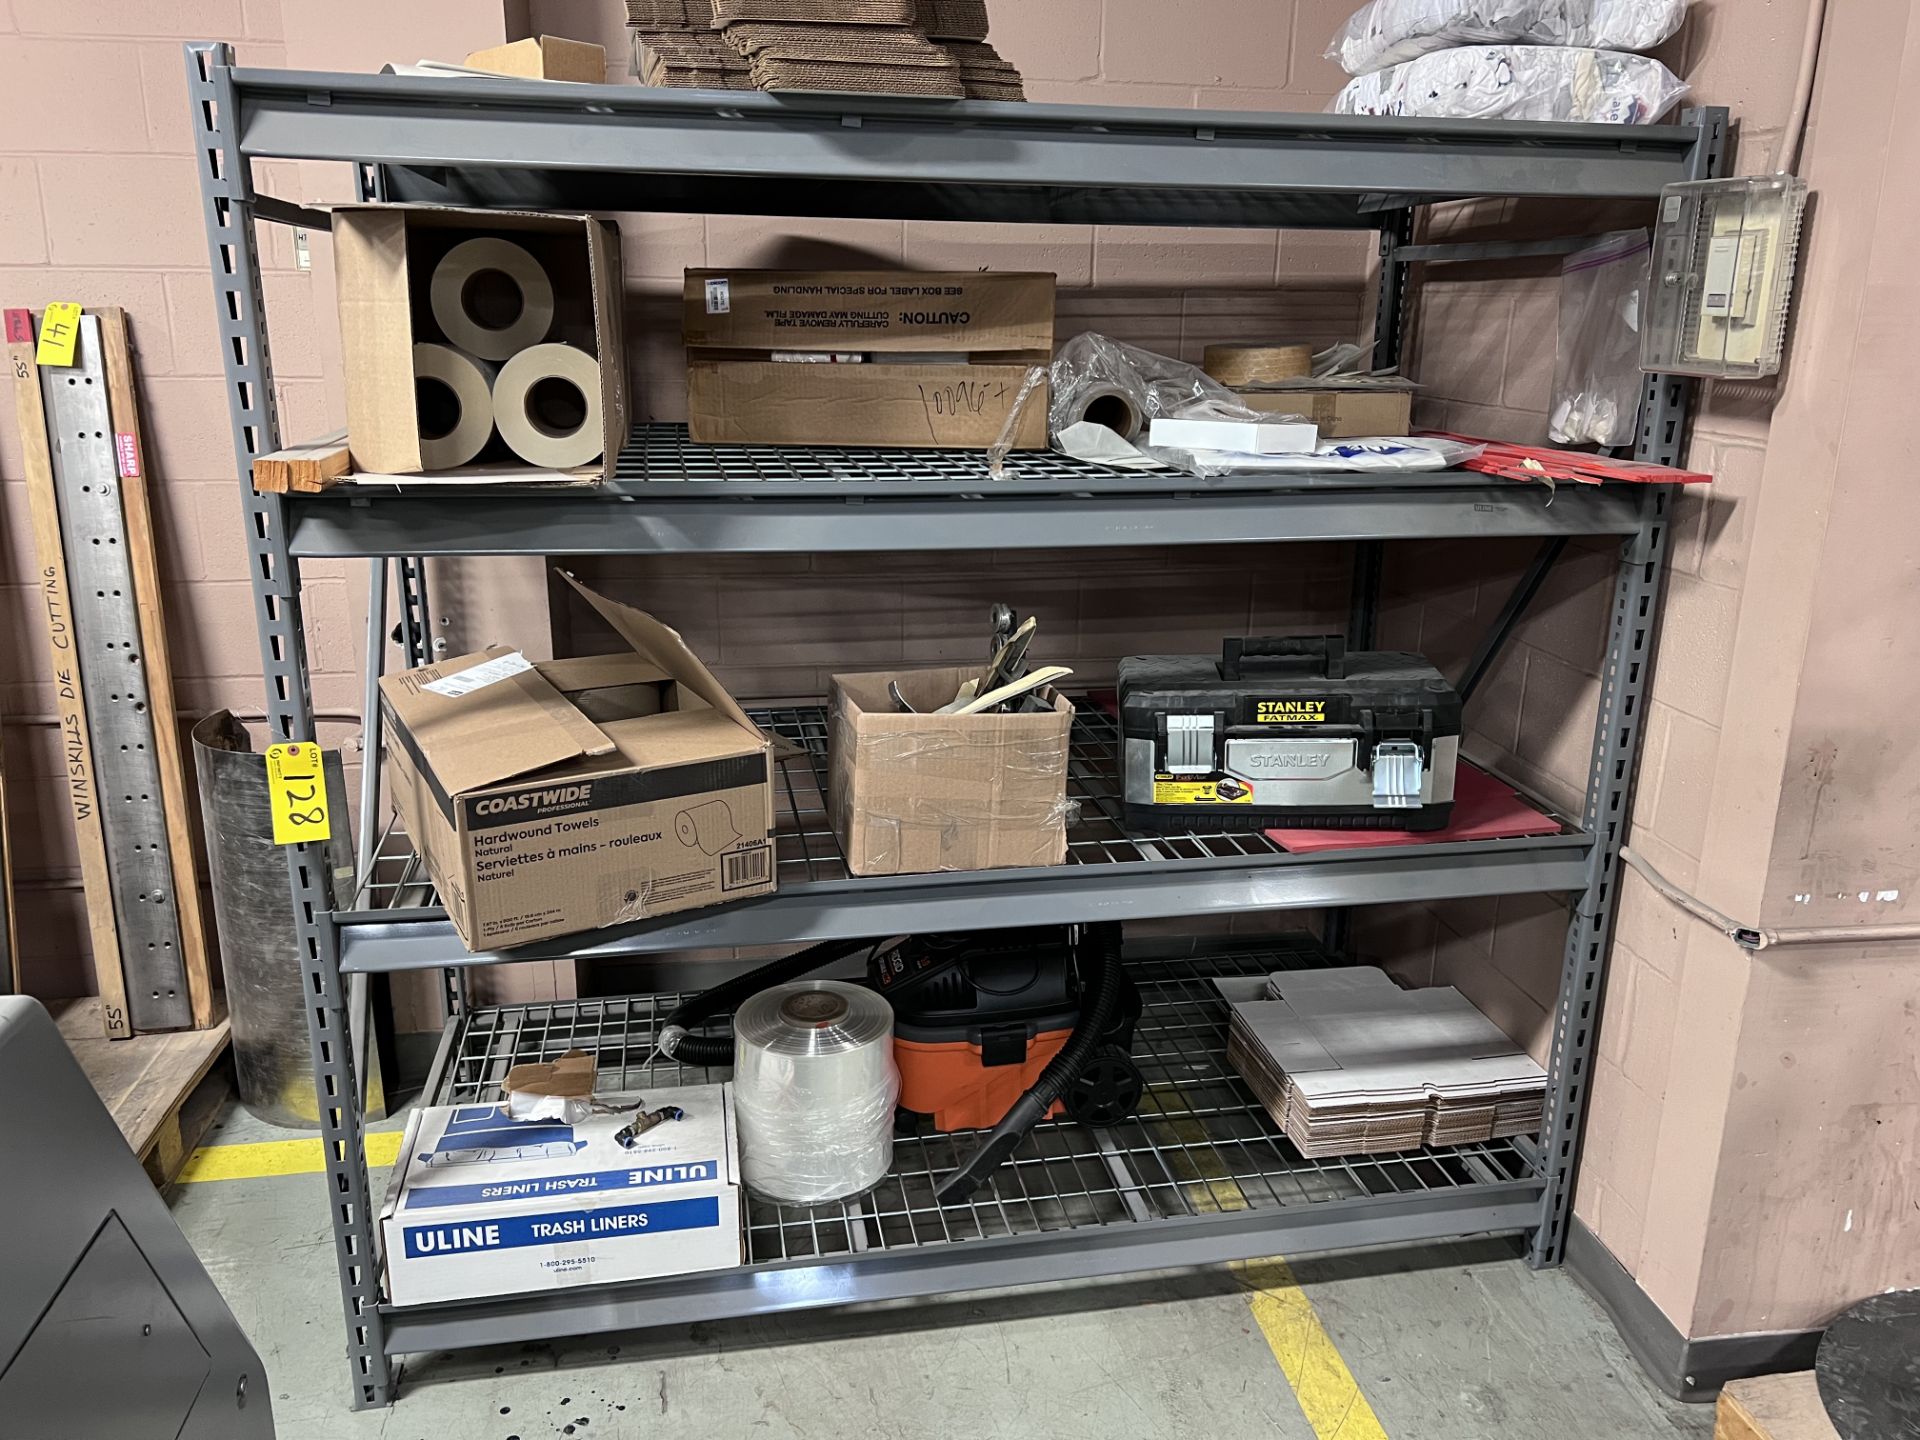 4-LEVEL SHELVING UNIT W/ CAGE INSERT SHELVING, APPROX. 3'D X 6'W (NO CONTENTS)